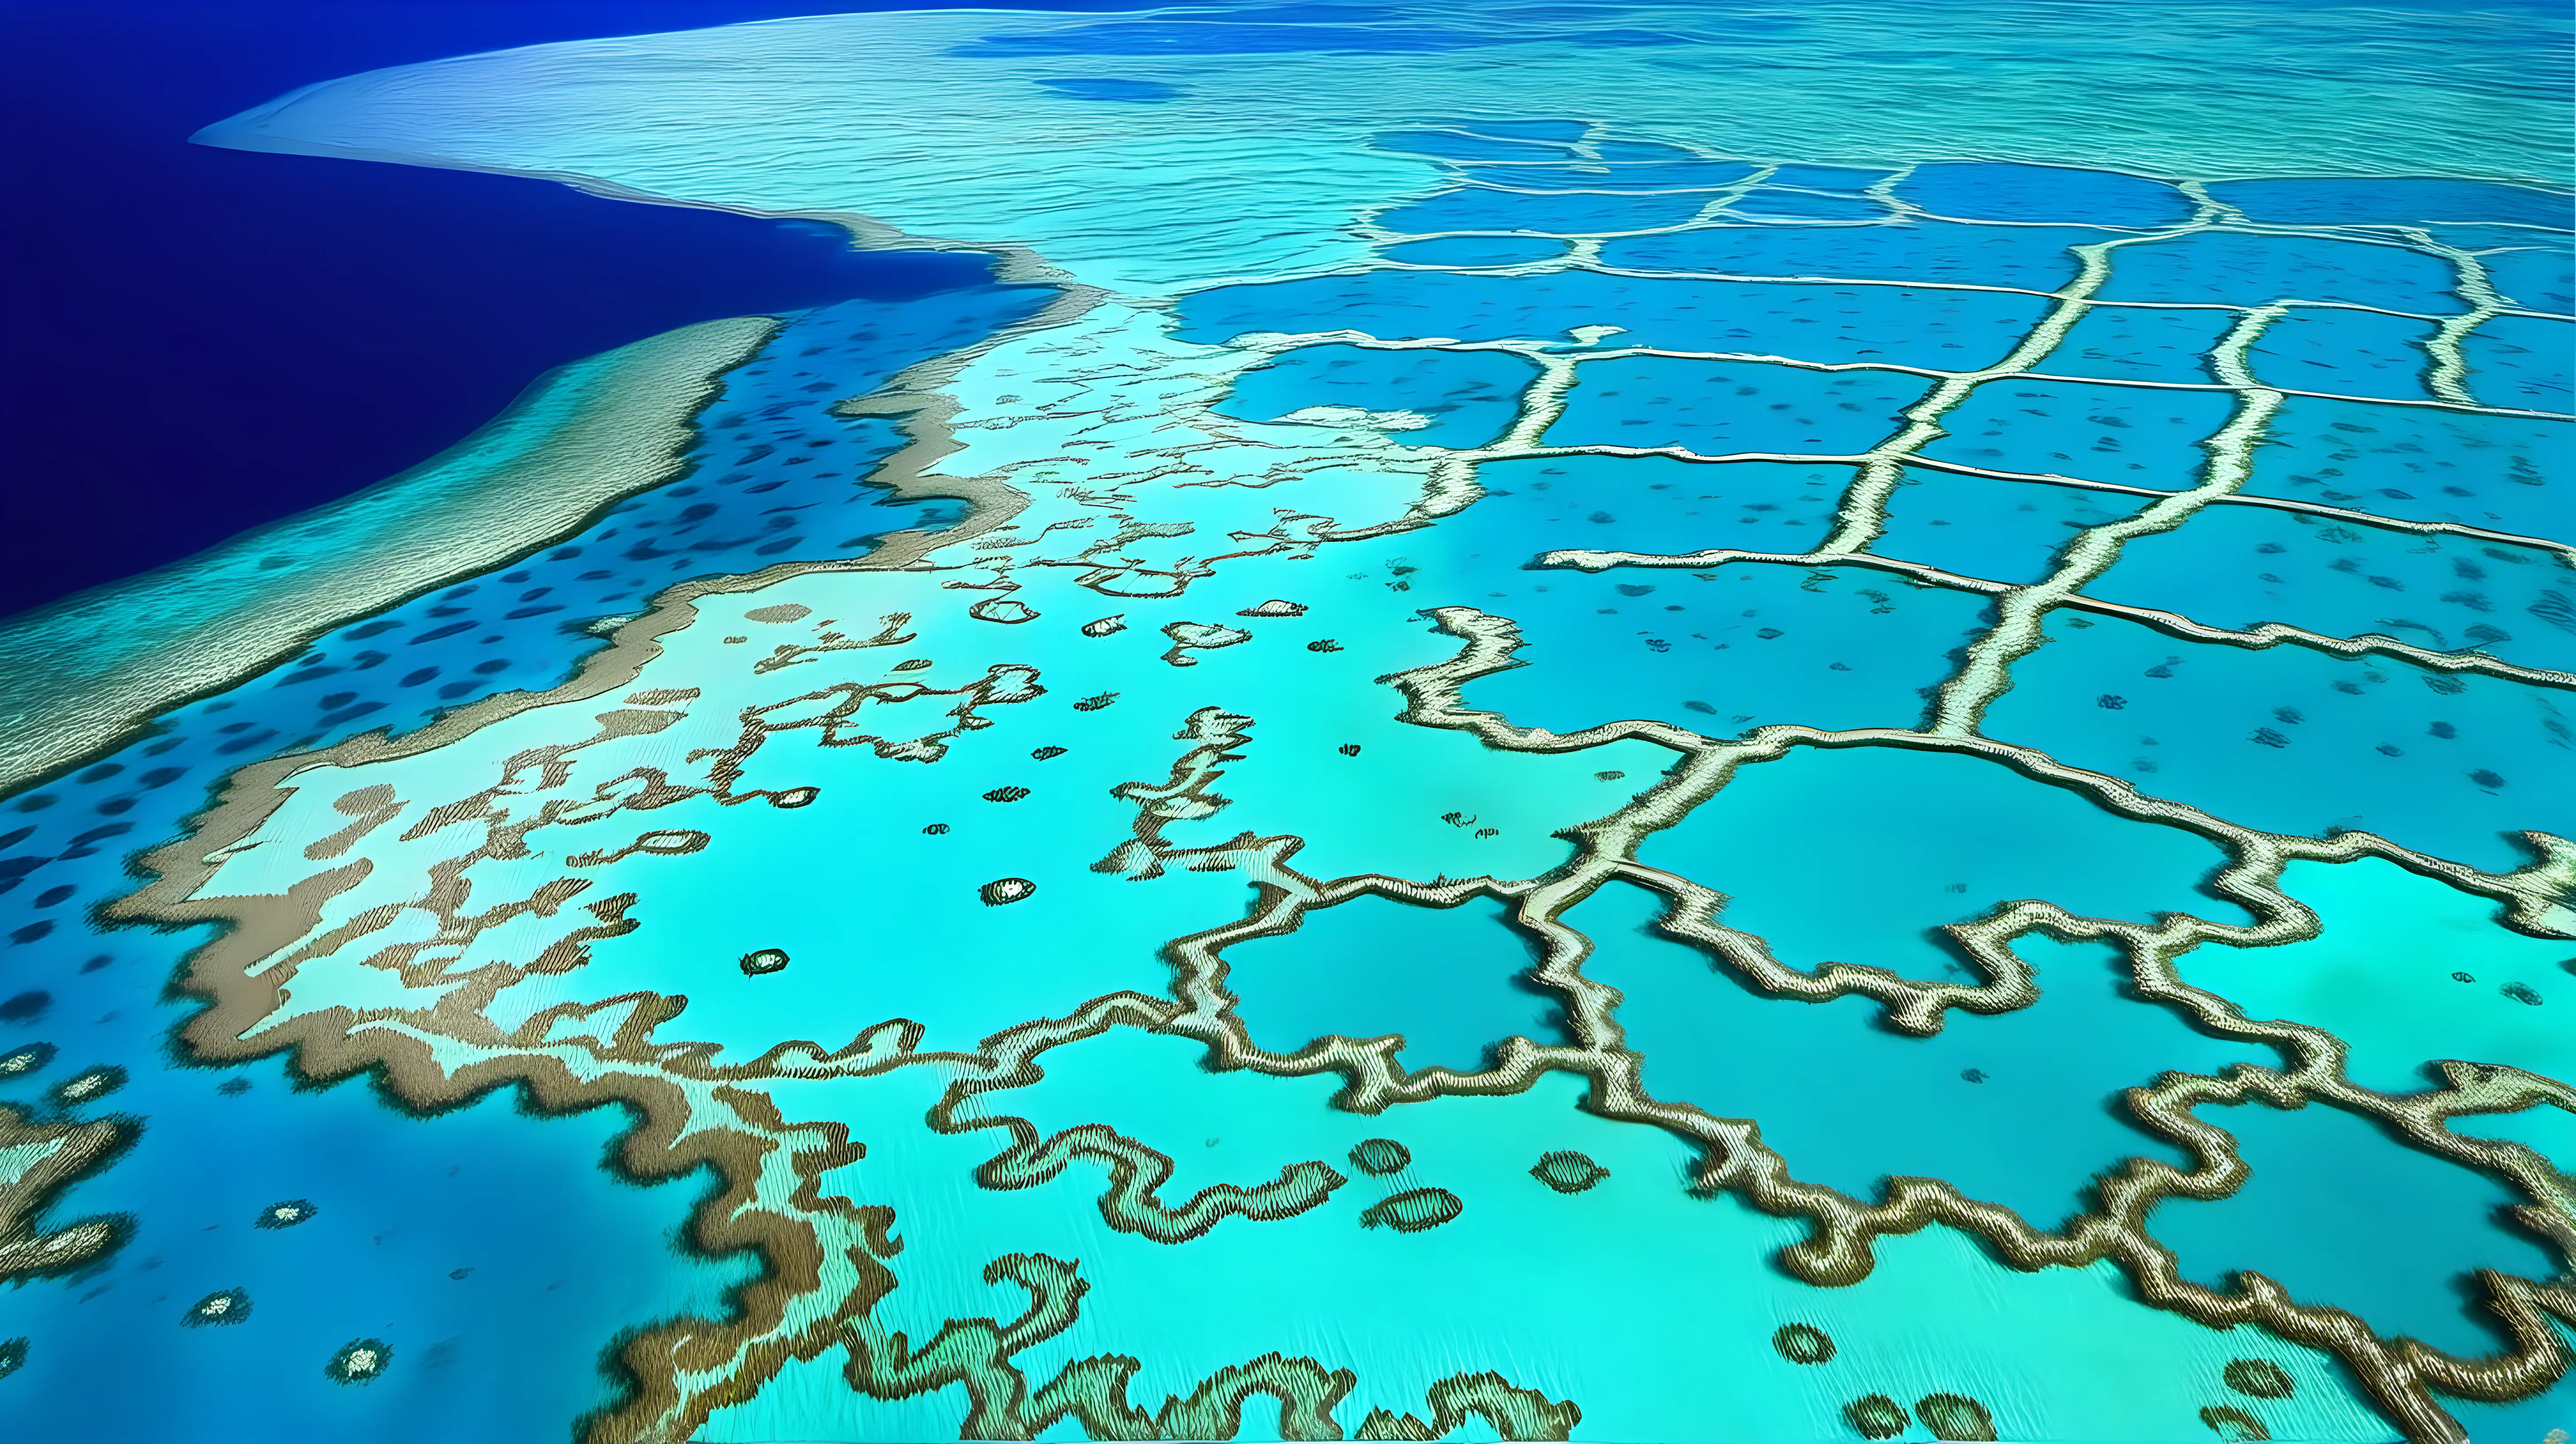 Magnificent Beauty of the Great Barrier Reef in Full Splendor